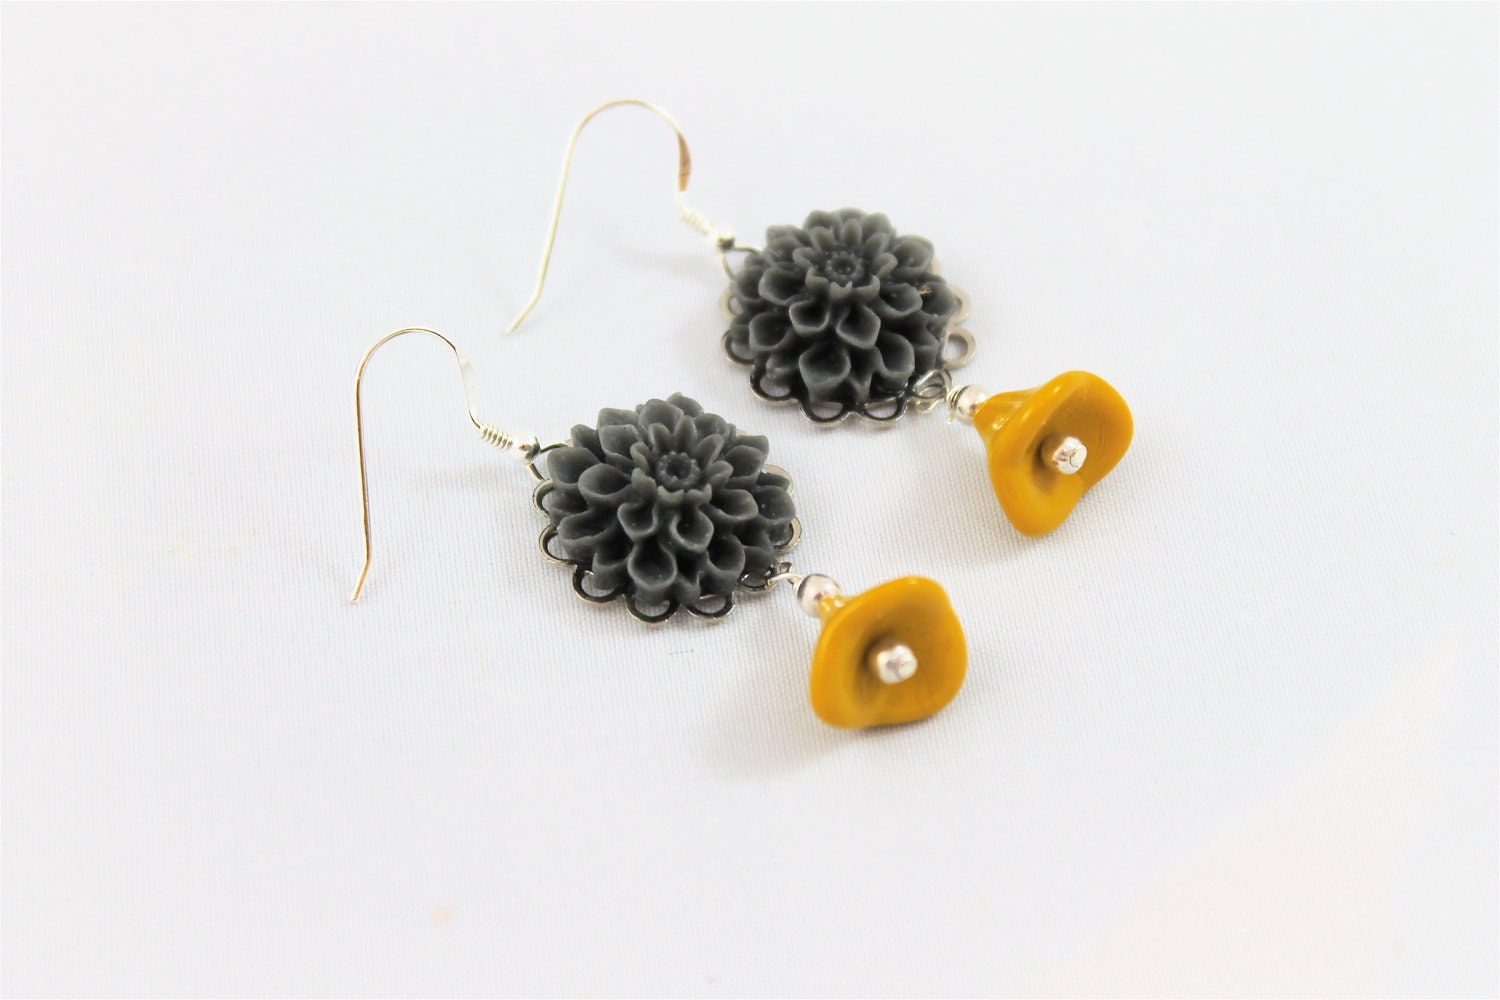 Mustard gray flower earrings gray dahlias yellow Czech flower beads sterling ear wires shabby chic vintage style